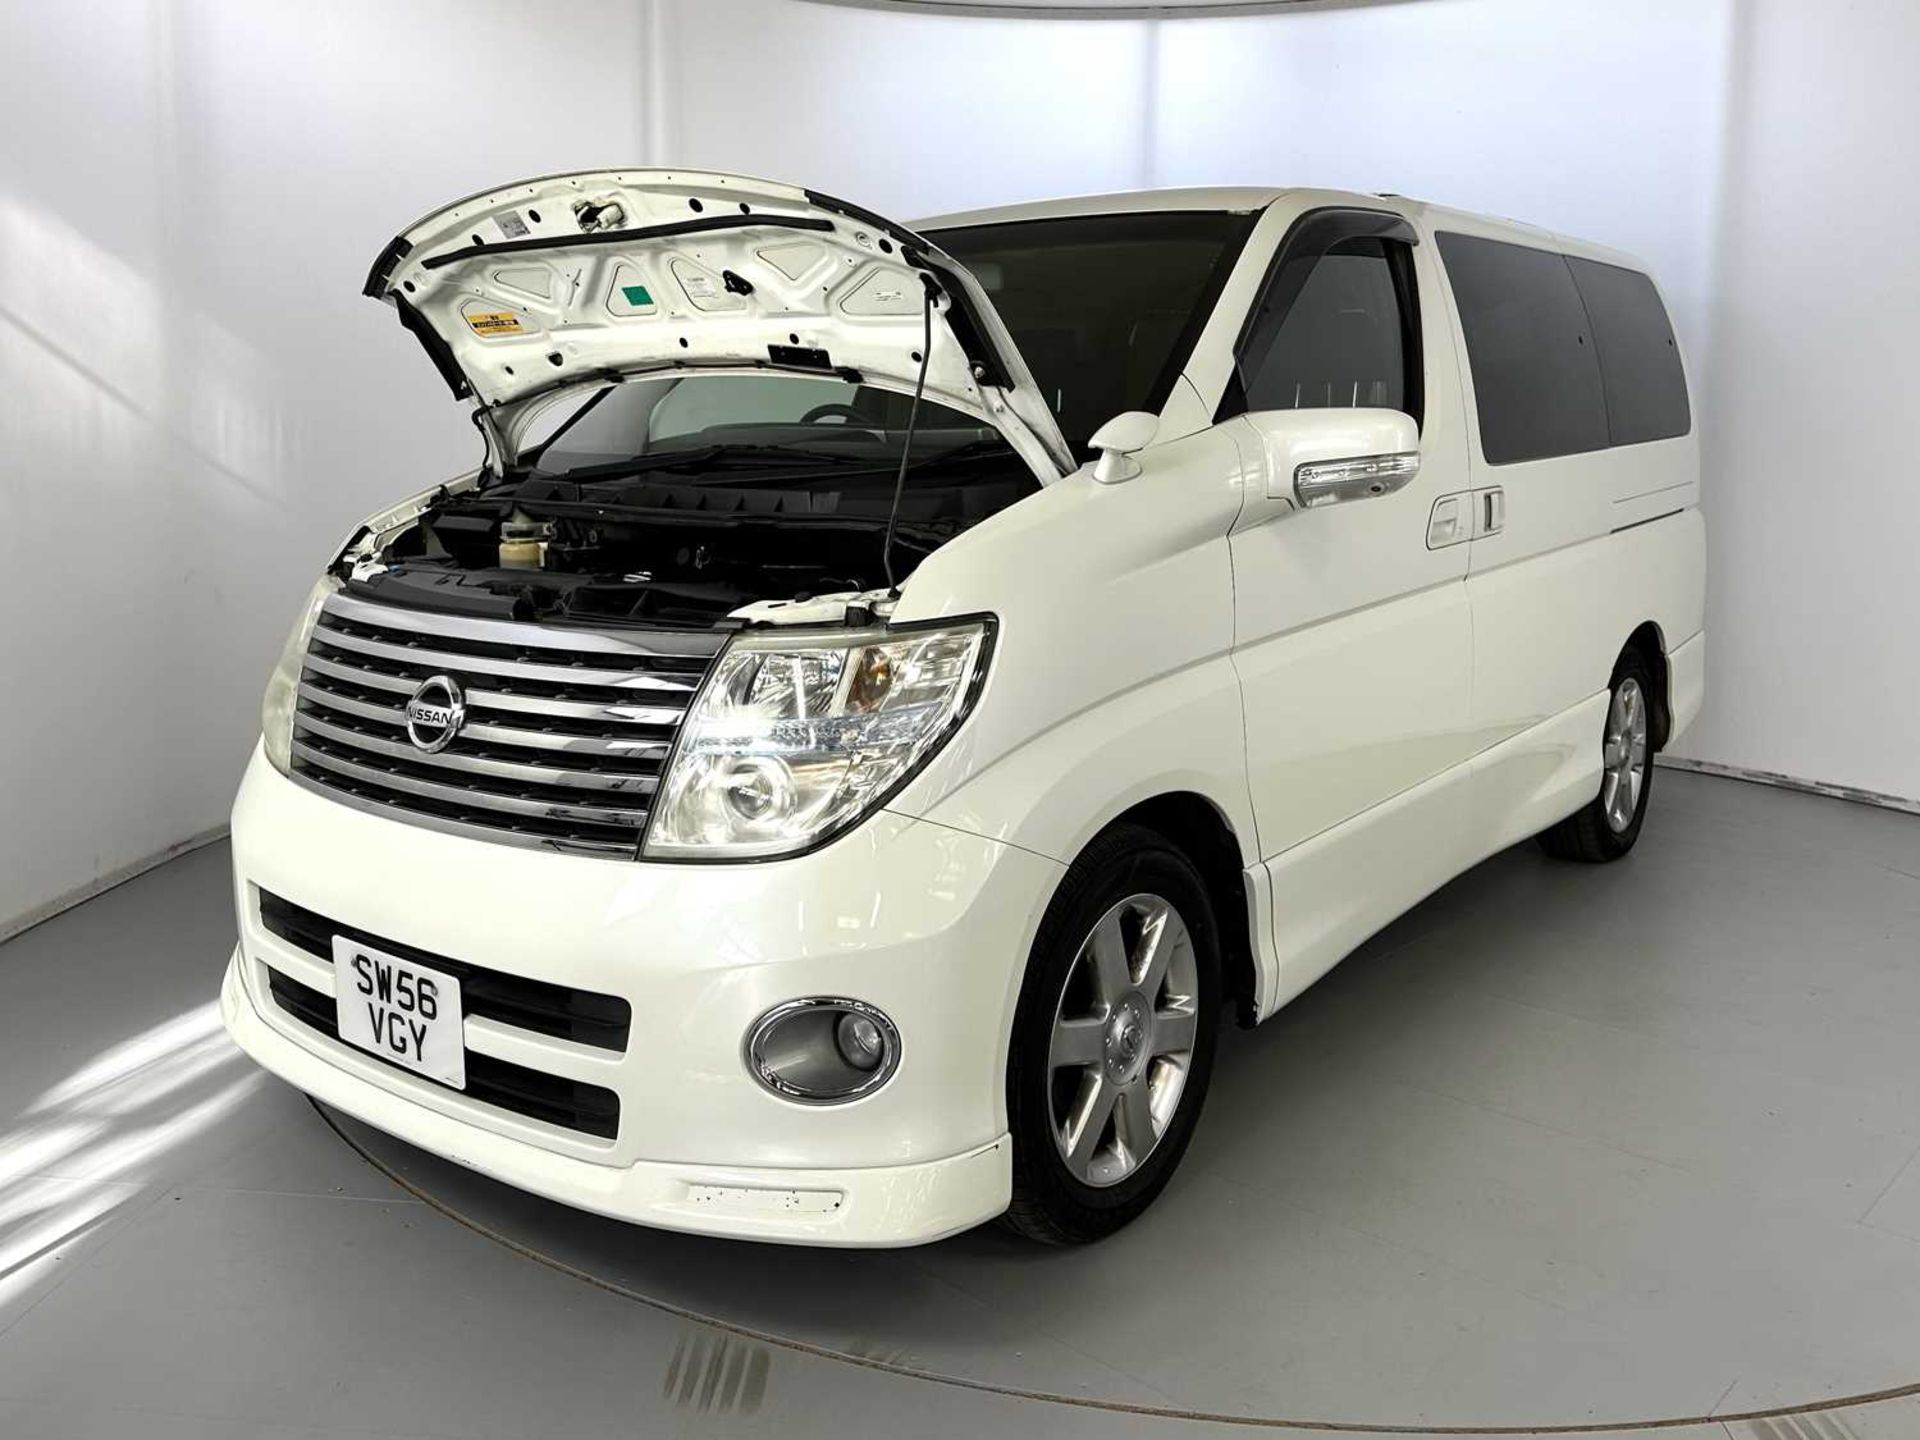 2007 Nissan Elgrand - Highway Star Edition 4WD - Image 38 of 39